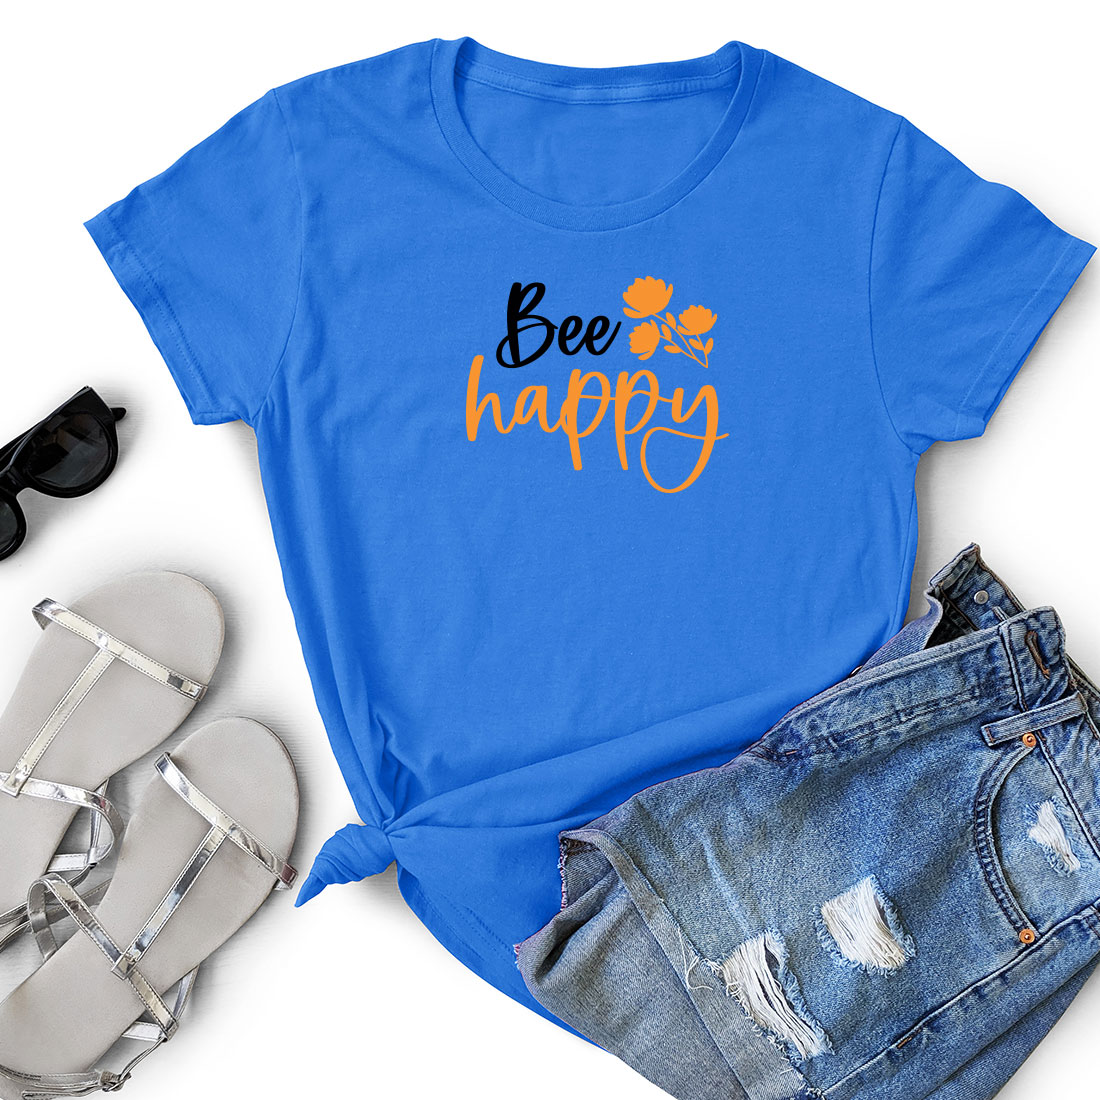 T - shirt that says bee happy next to a pair of shorts.